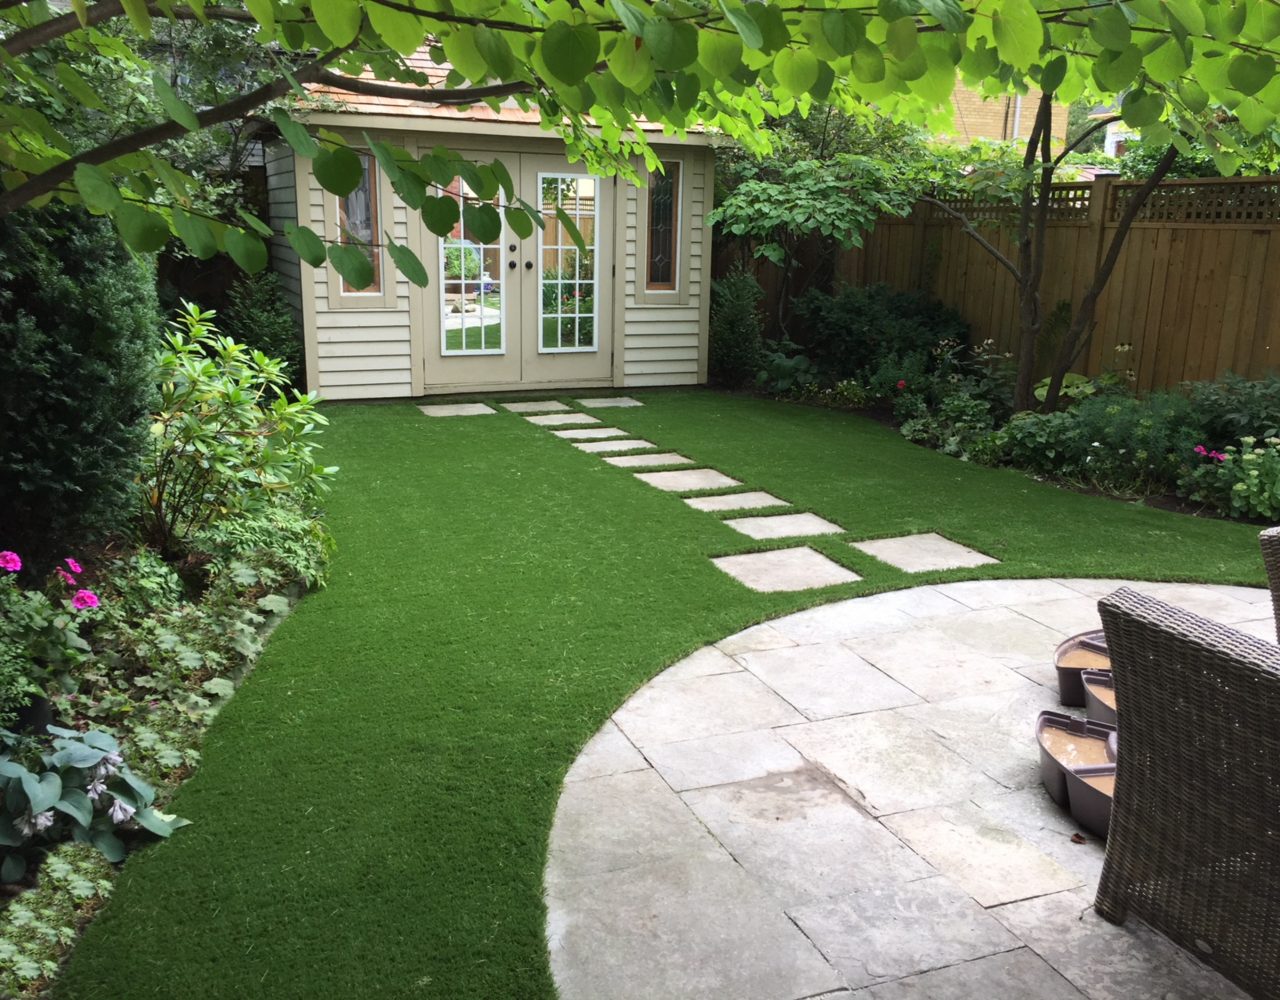 Flagstone path adds natural look around artificial grass